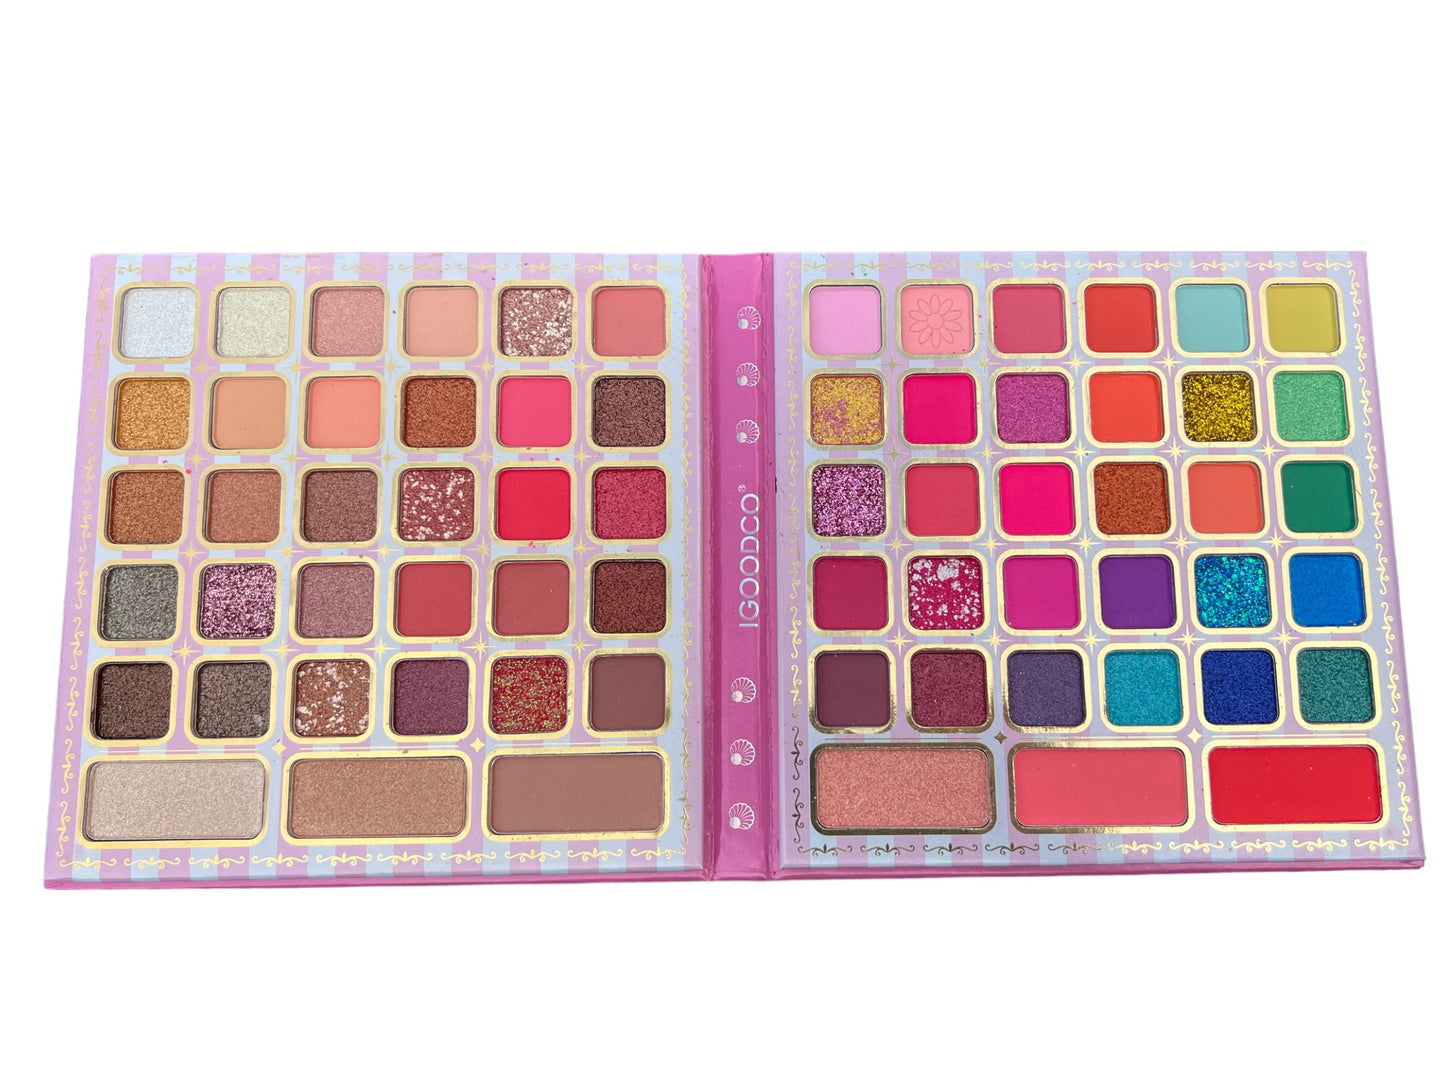 IGOODCO BLOOM TIME EYE AND FACE PALETTE IG-2994 R24